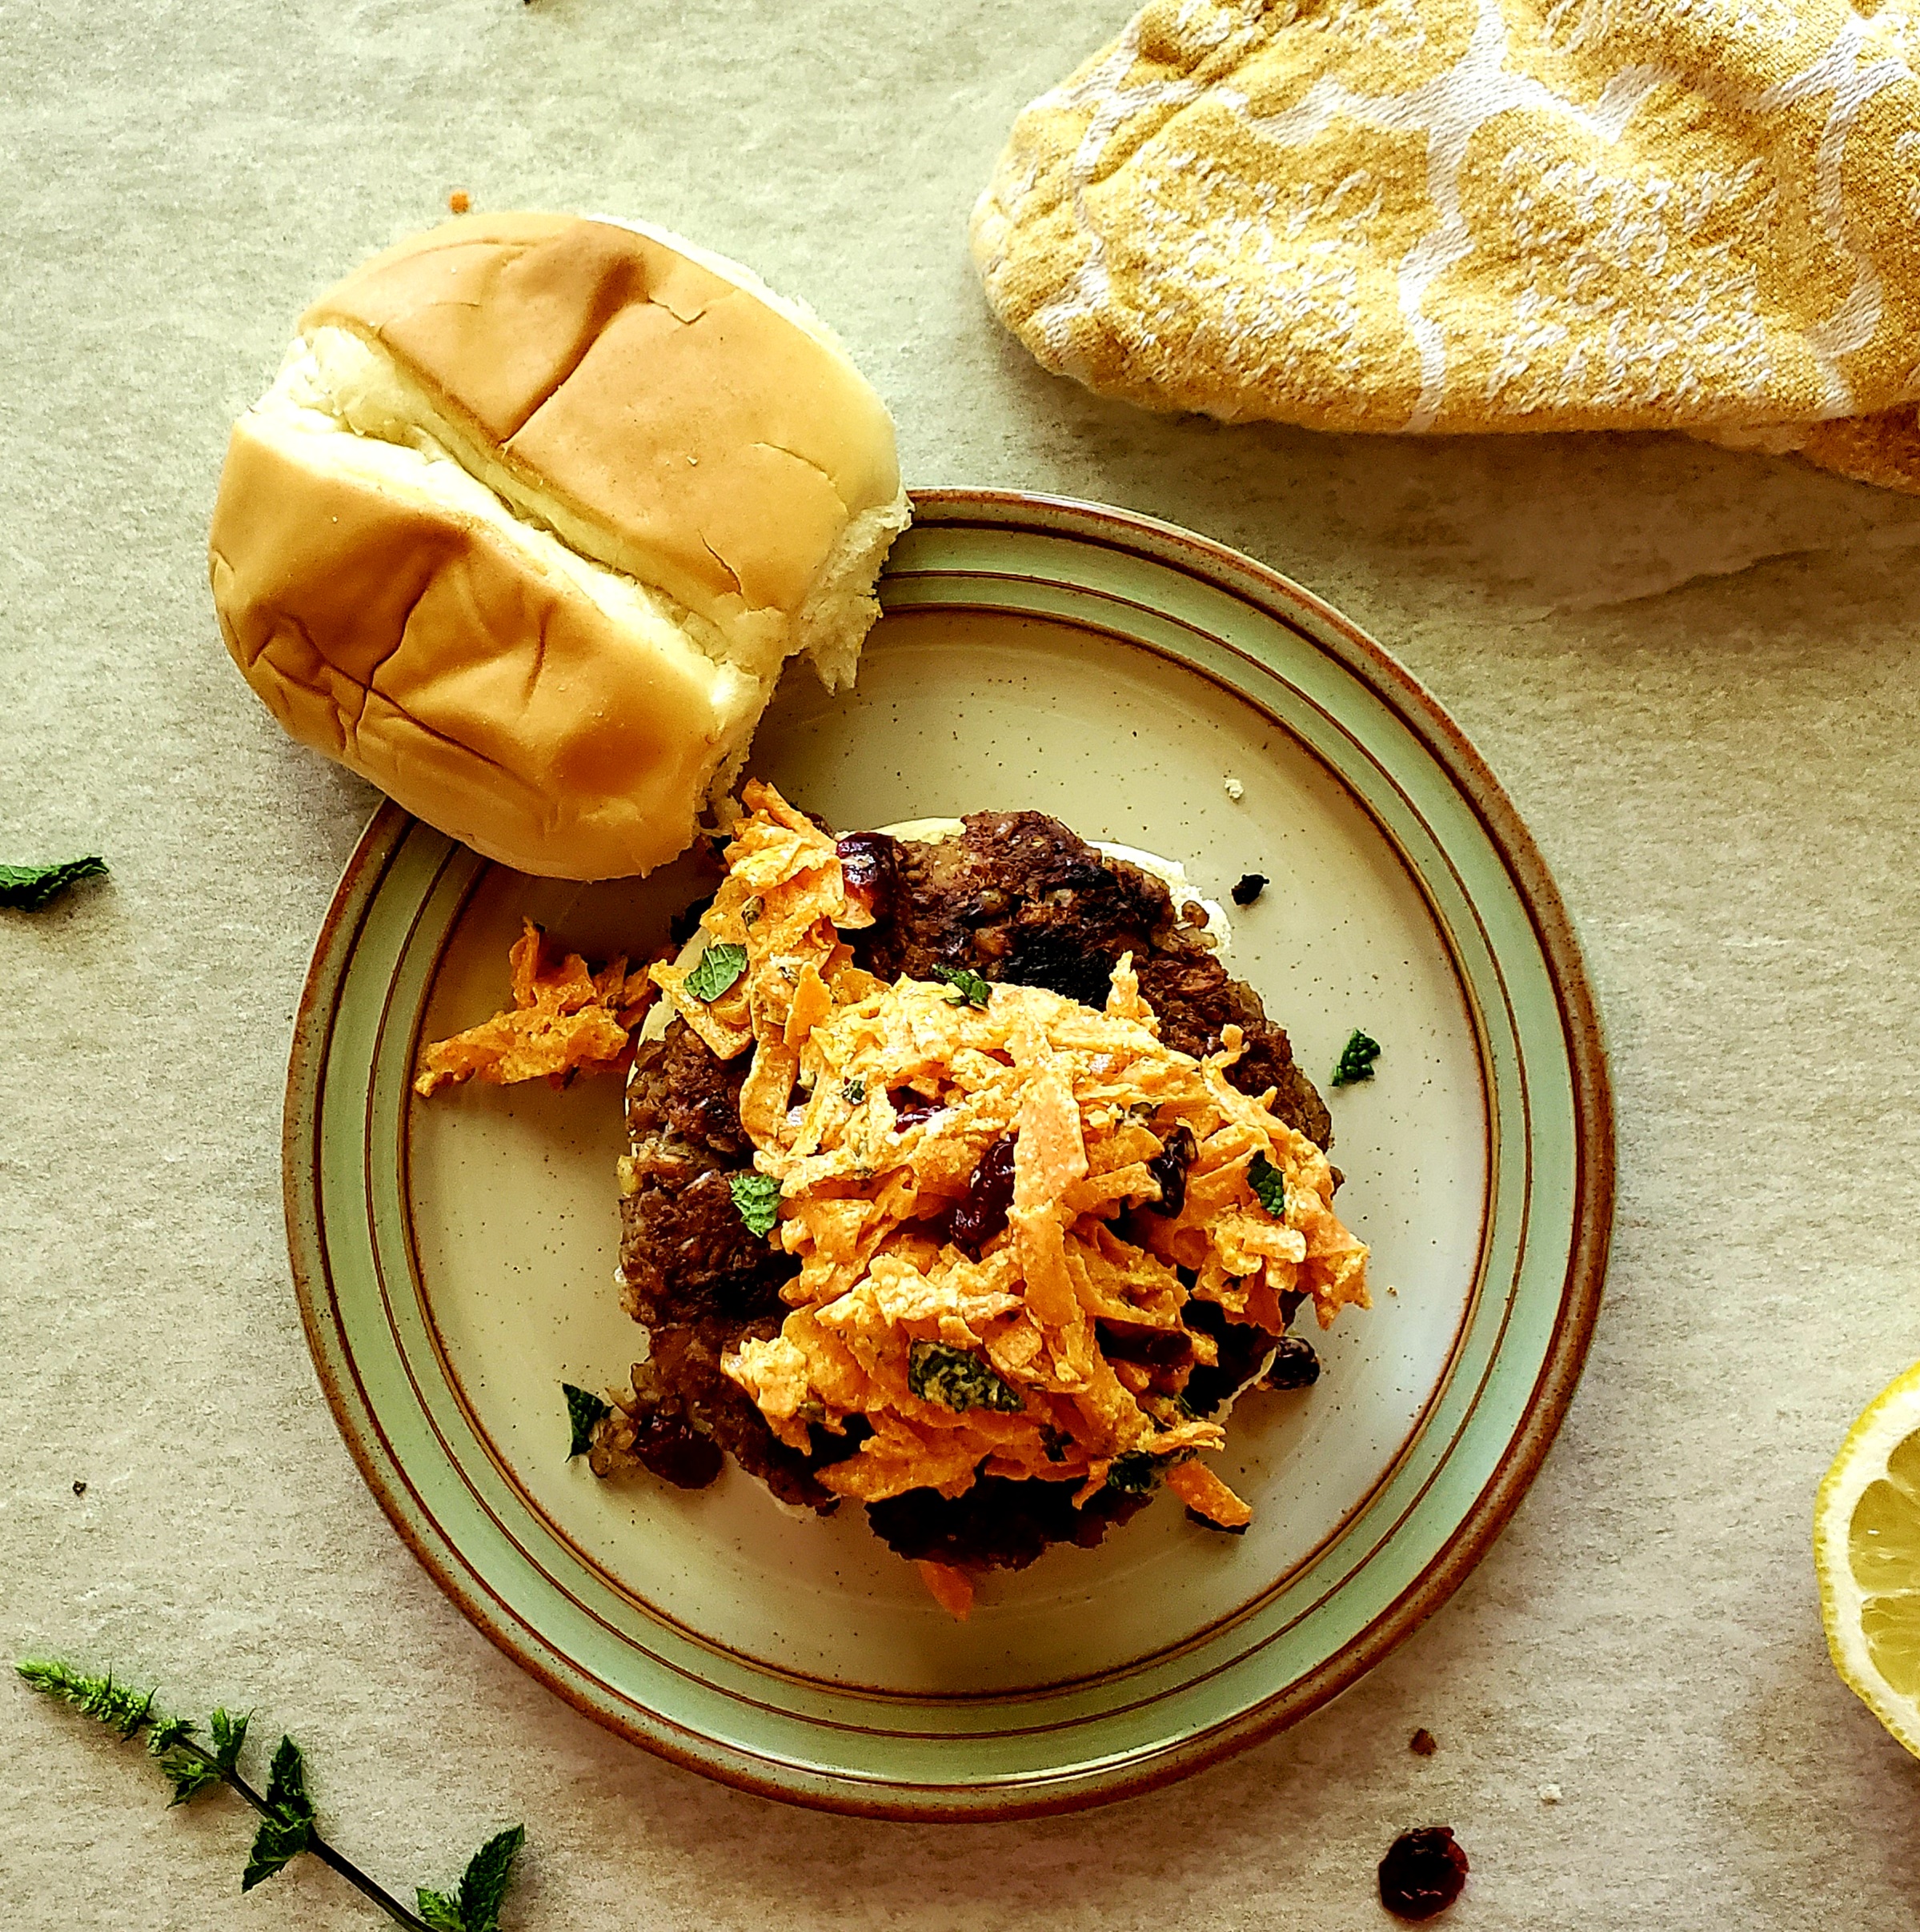 Chickpea Burgers with Mint Tahini Carrot Slaw (Recipe Inspired by THE BOOK OF LONGINGS)